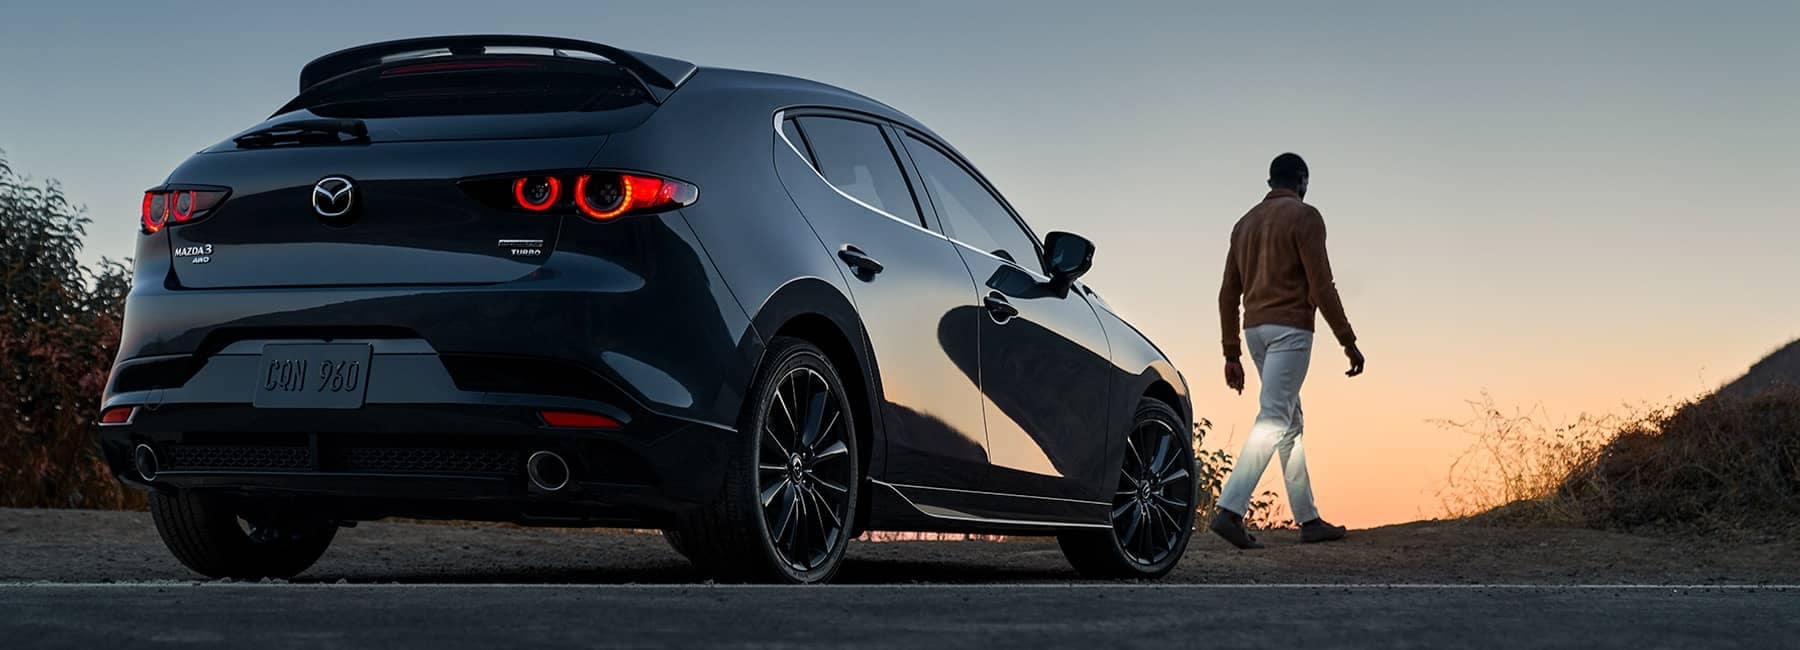 2022 Mazda 3 hatchback back view with sunset